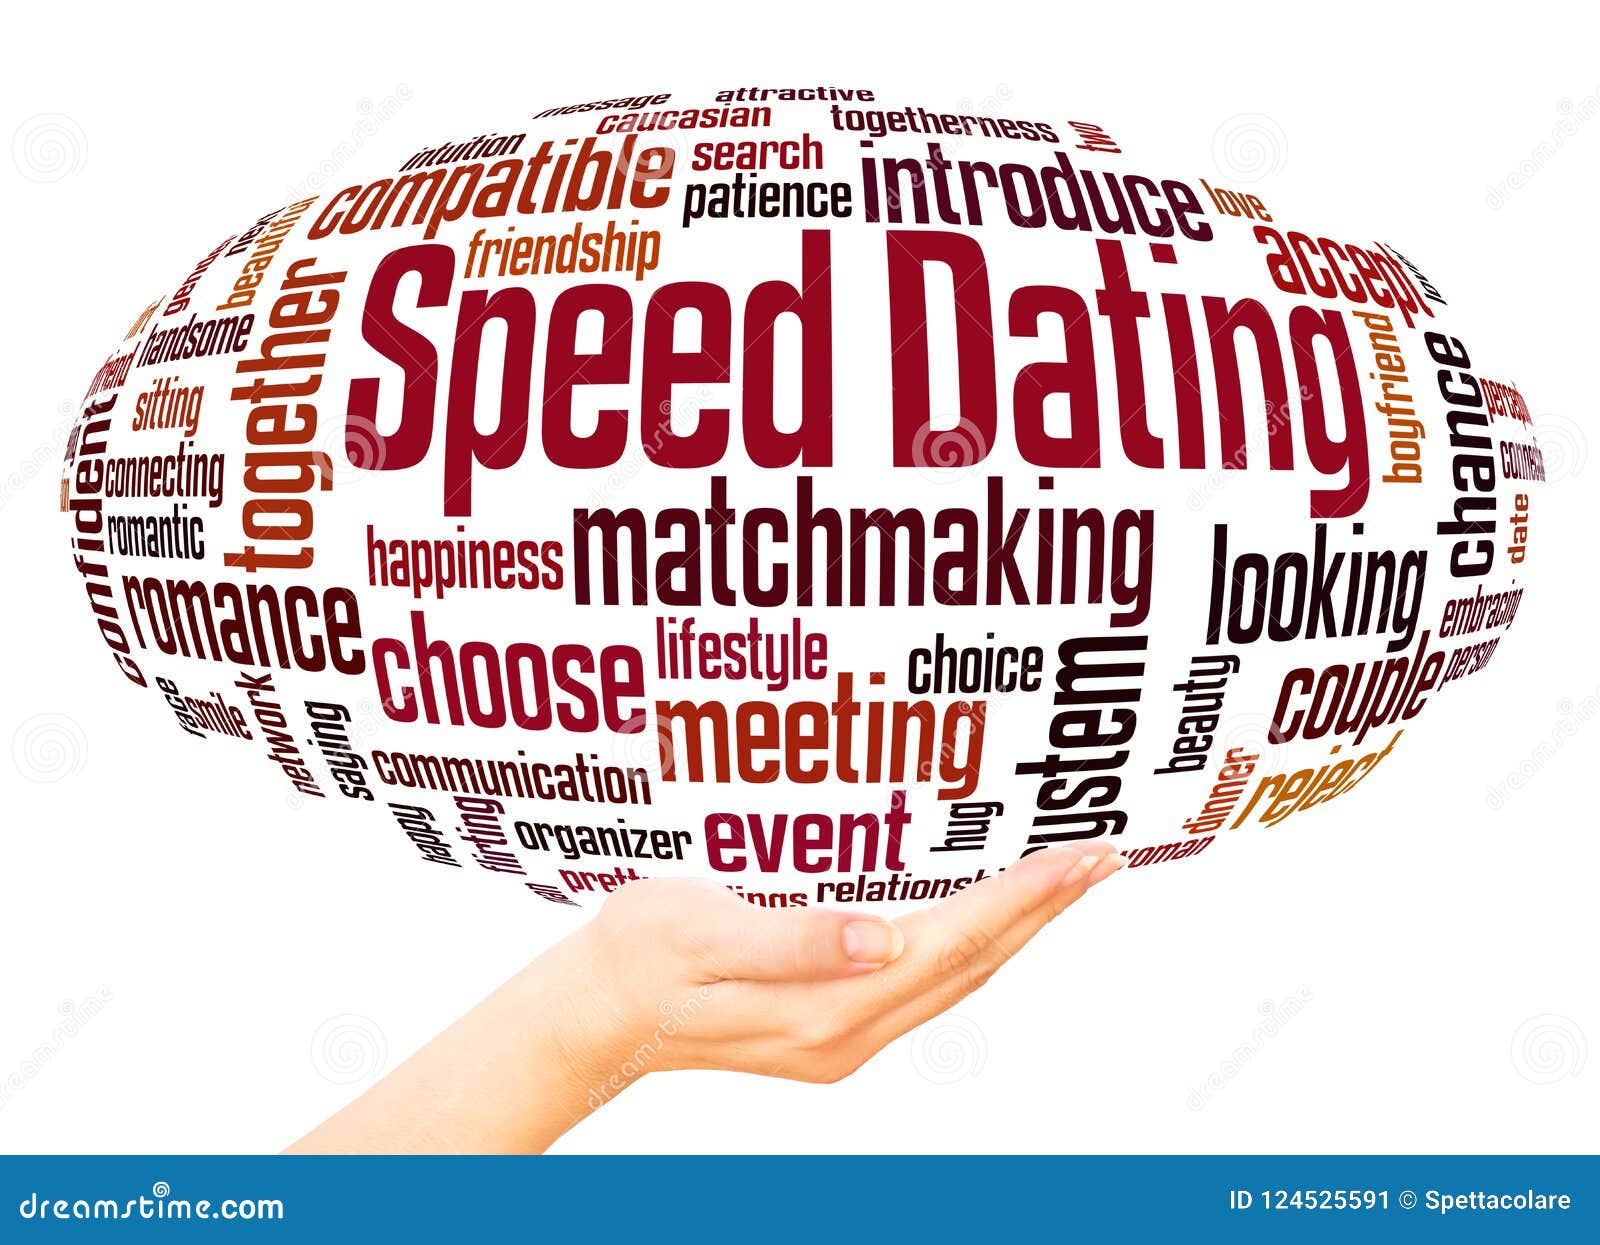 speed dating words